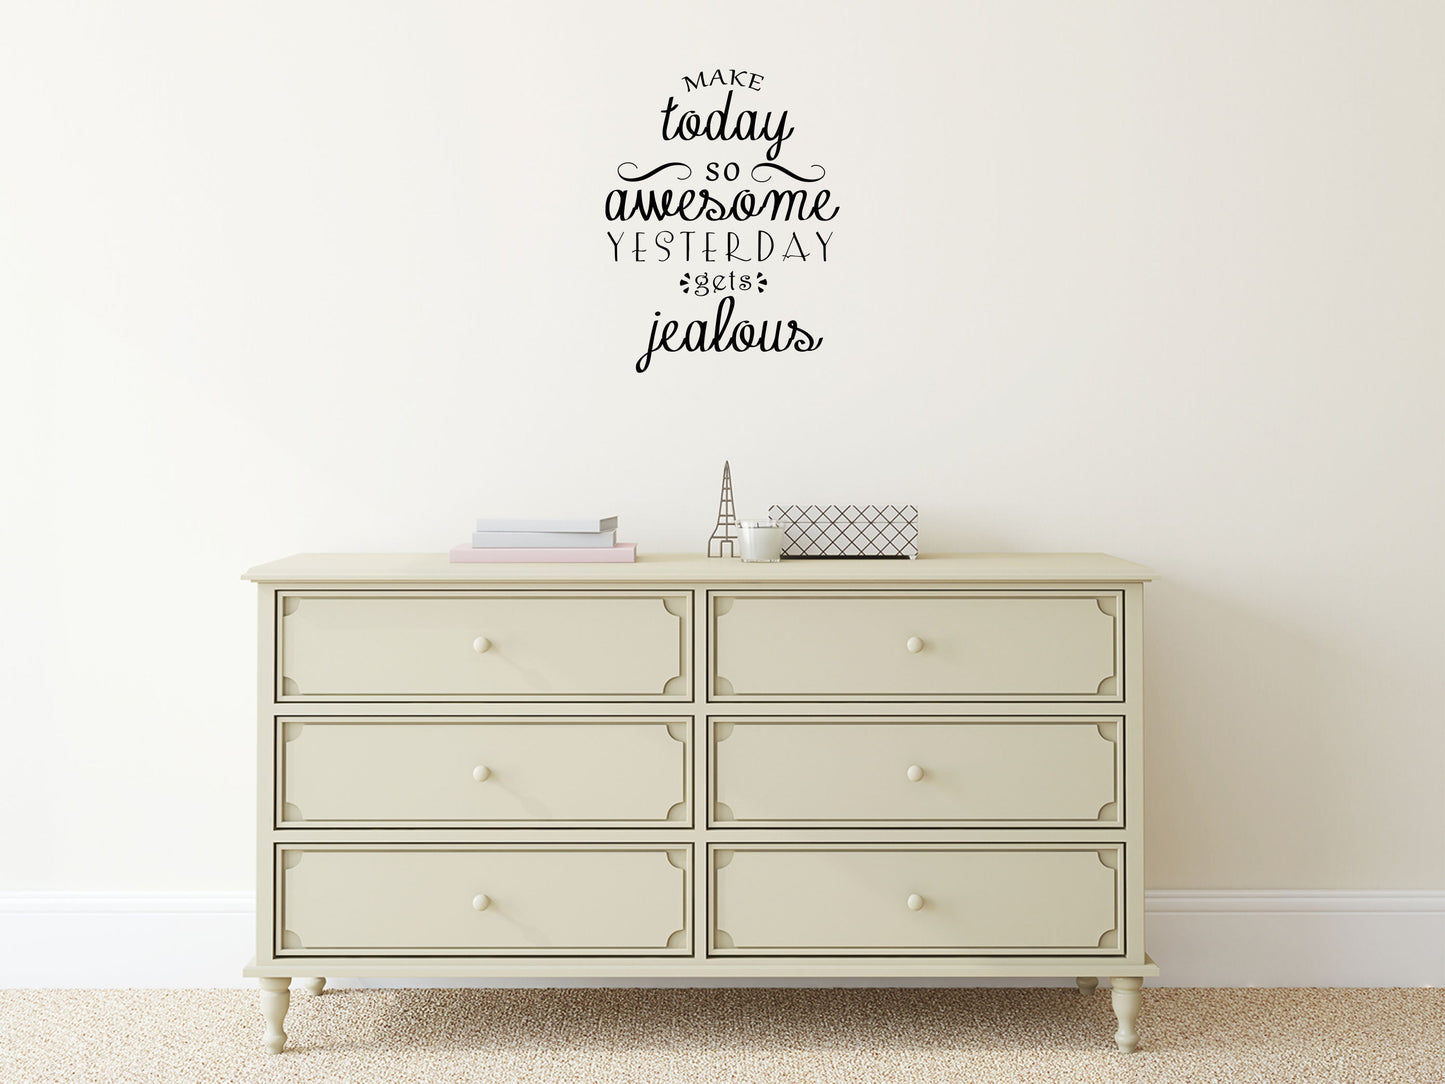 Make Today So Awesome Yesterday Gets Jealous Vinyl Wall Decal Inspirational Wall Signs 